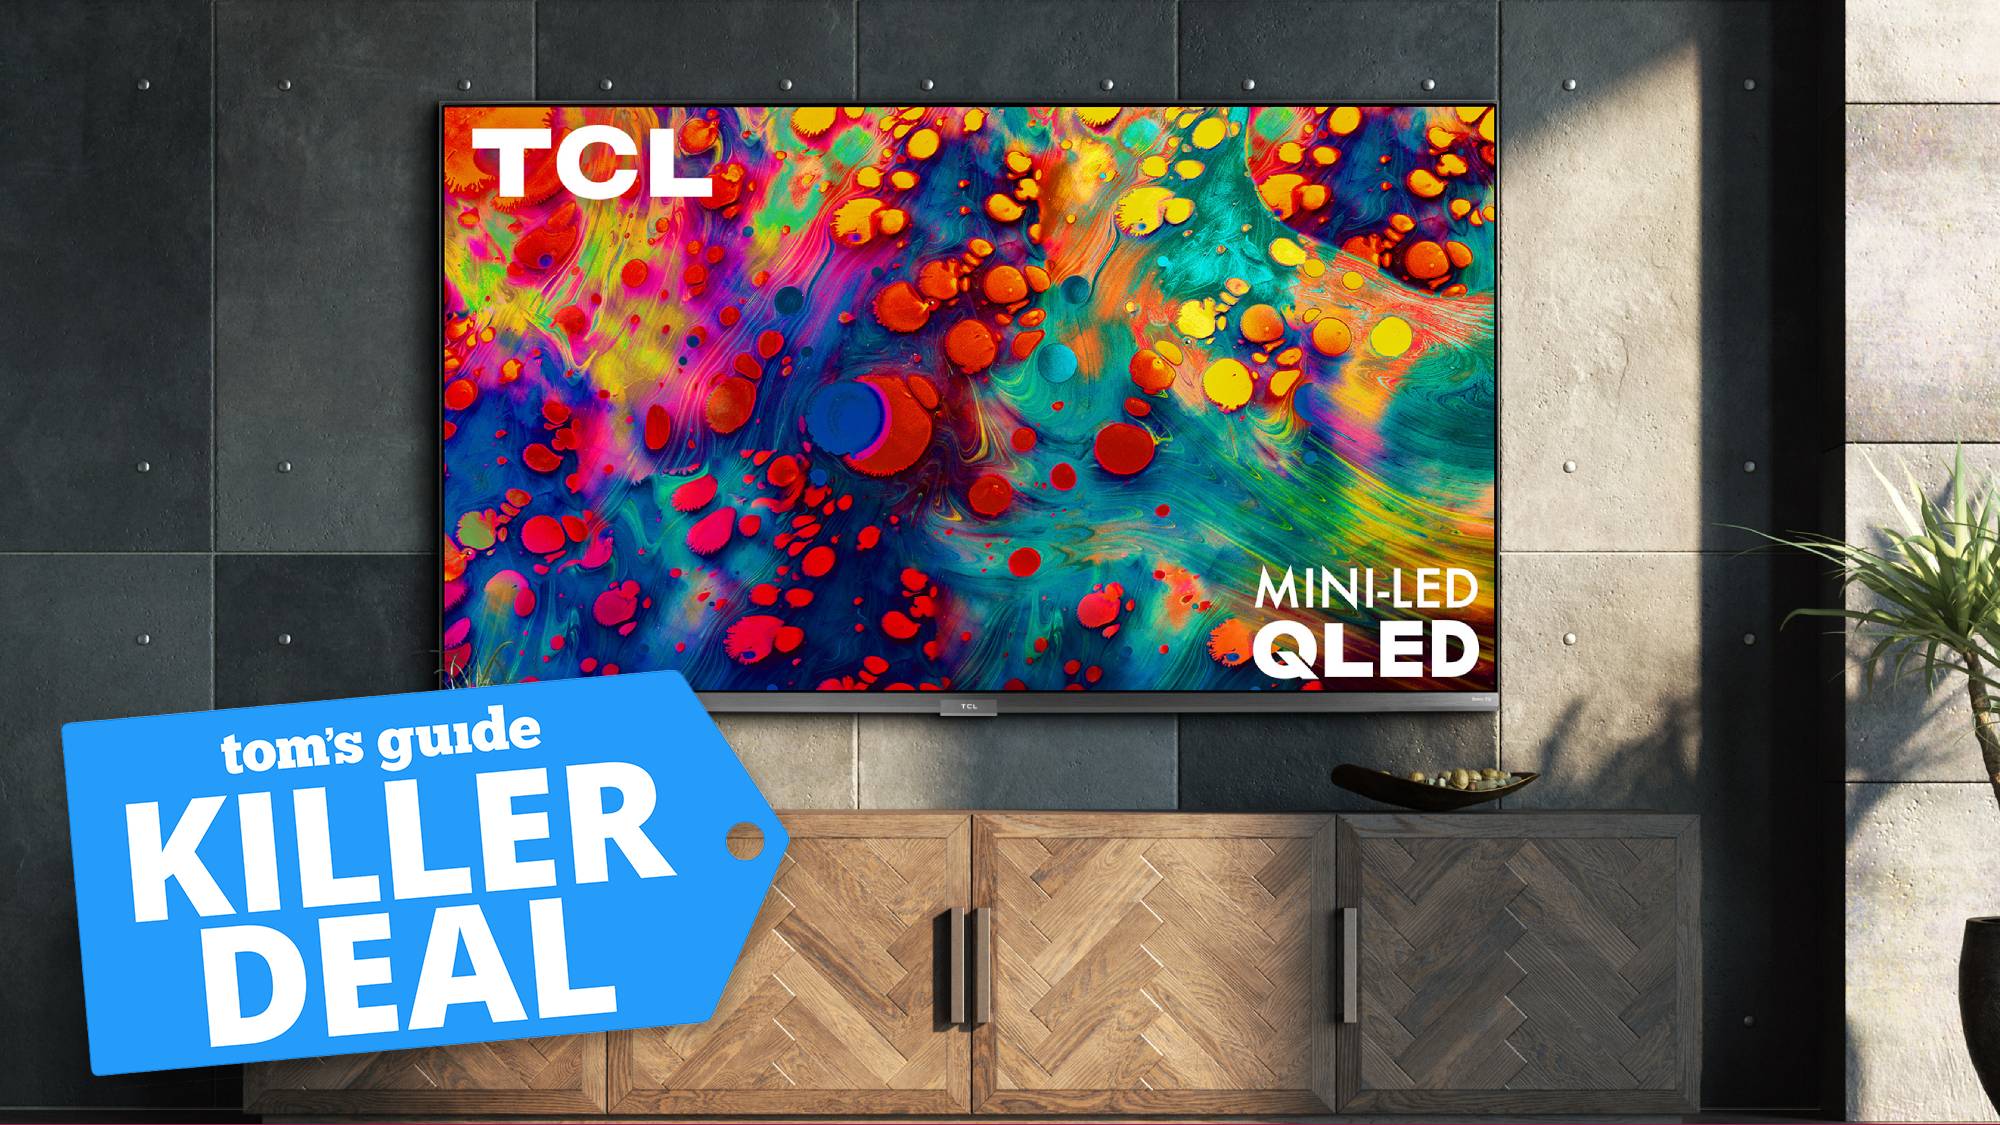 TCL 6-Series 4K TV with a Tom's Guide deal tag